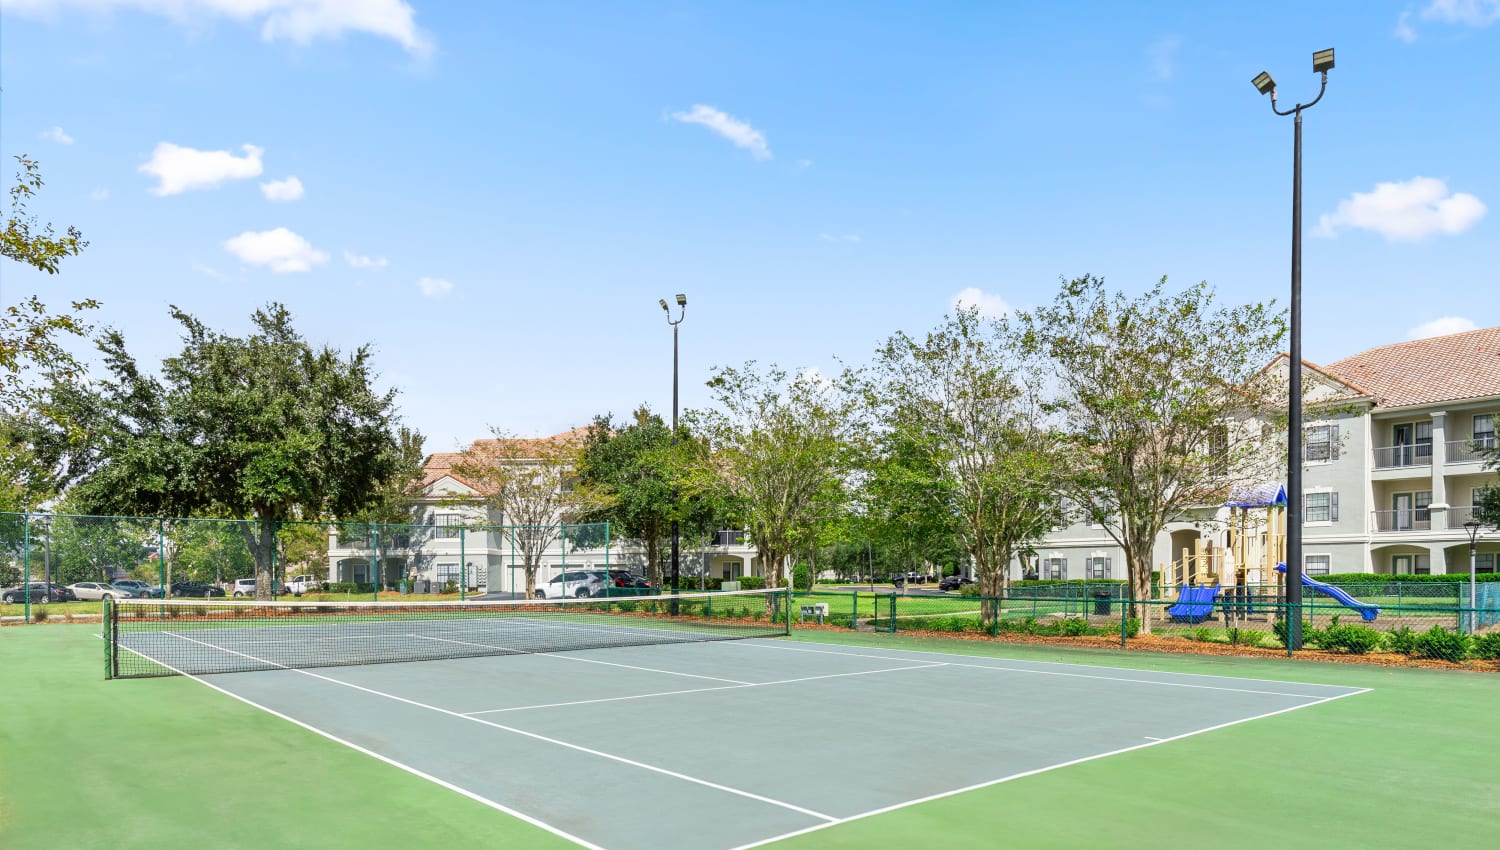 Tennis court at Mirador & Stovall at River City in Jacksonville, Florida